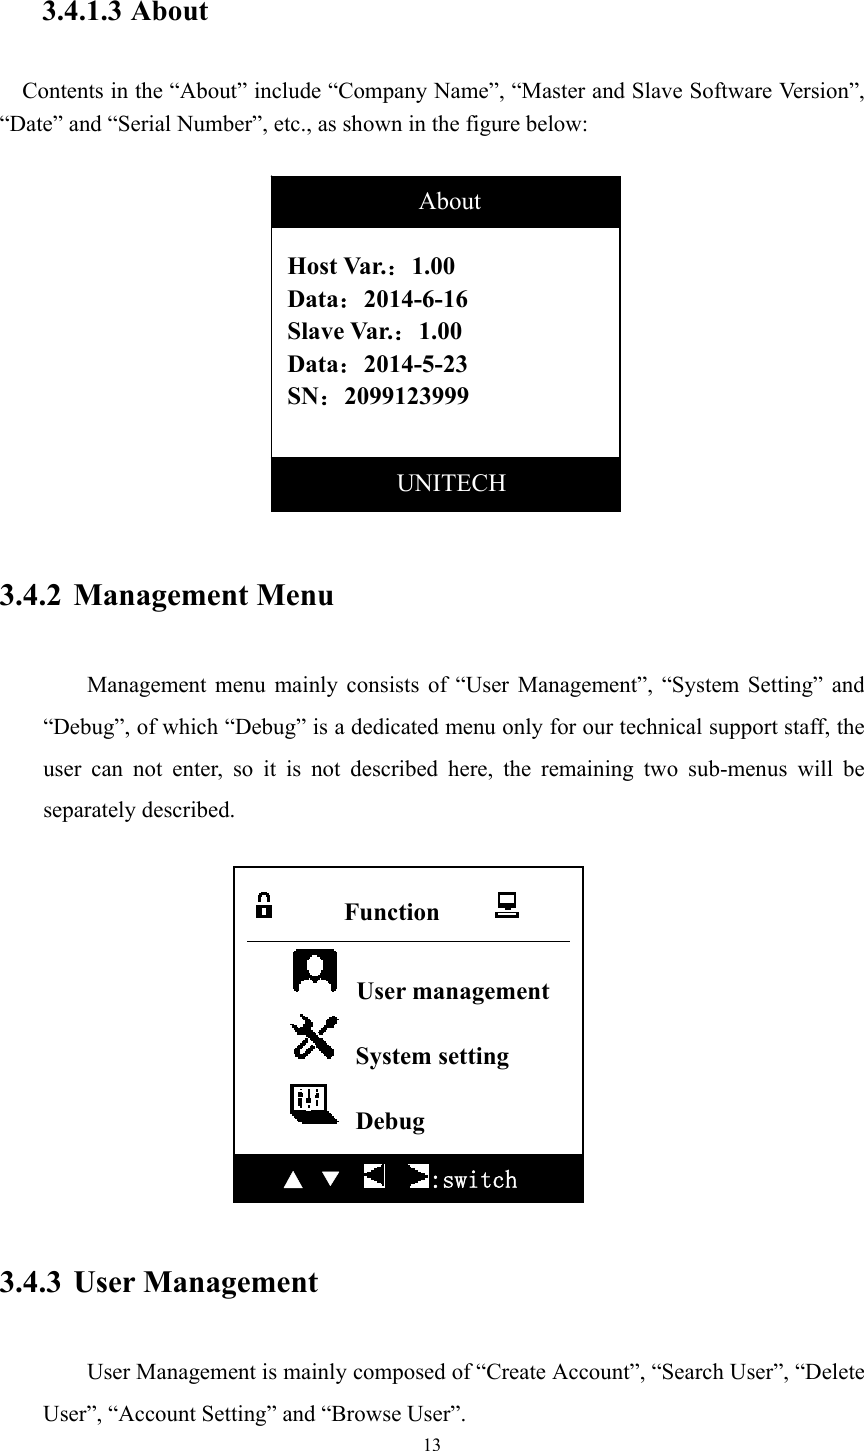 13  3.4.1.3 About   Contents in the “About” include “Company Name”, “Master and Slave Software Version”, “Date” and “Serial Number”, etc., as shown in the figure below:             3.4.2 Management Menu  Management menu mainly consists of “User Management”, “System Setting” and “Debug”, of which “Debug” is a dedicated menu only for our technical support staff, the user can not enter, so it is not described here, the remaining two sub-menus will be separately described.              3.4.3 User Management  User Management is mainly composed of “Create Account”, “Search User”, “Delete User”, “Account Setting” and “Browse User”.  Host Var.：1.00 Data：2014-6-16 Slave Var.：1.00 Data：2014-5-23 SN：2099123999               About           UNITECH       Function            User management  System setting  Debug ▲  ▼      :switch 